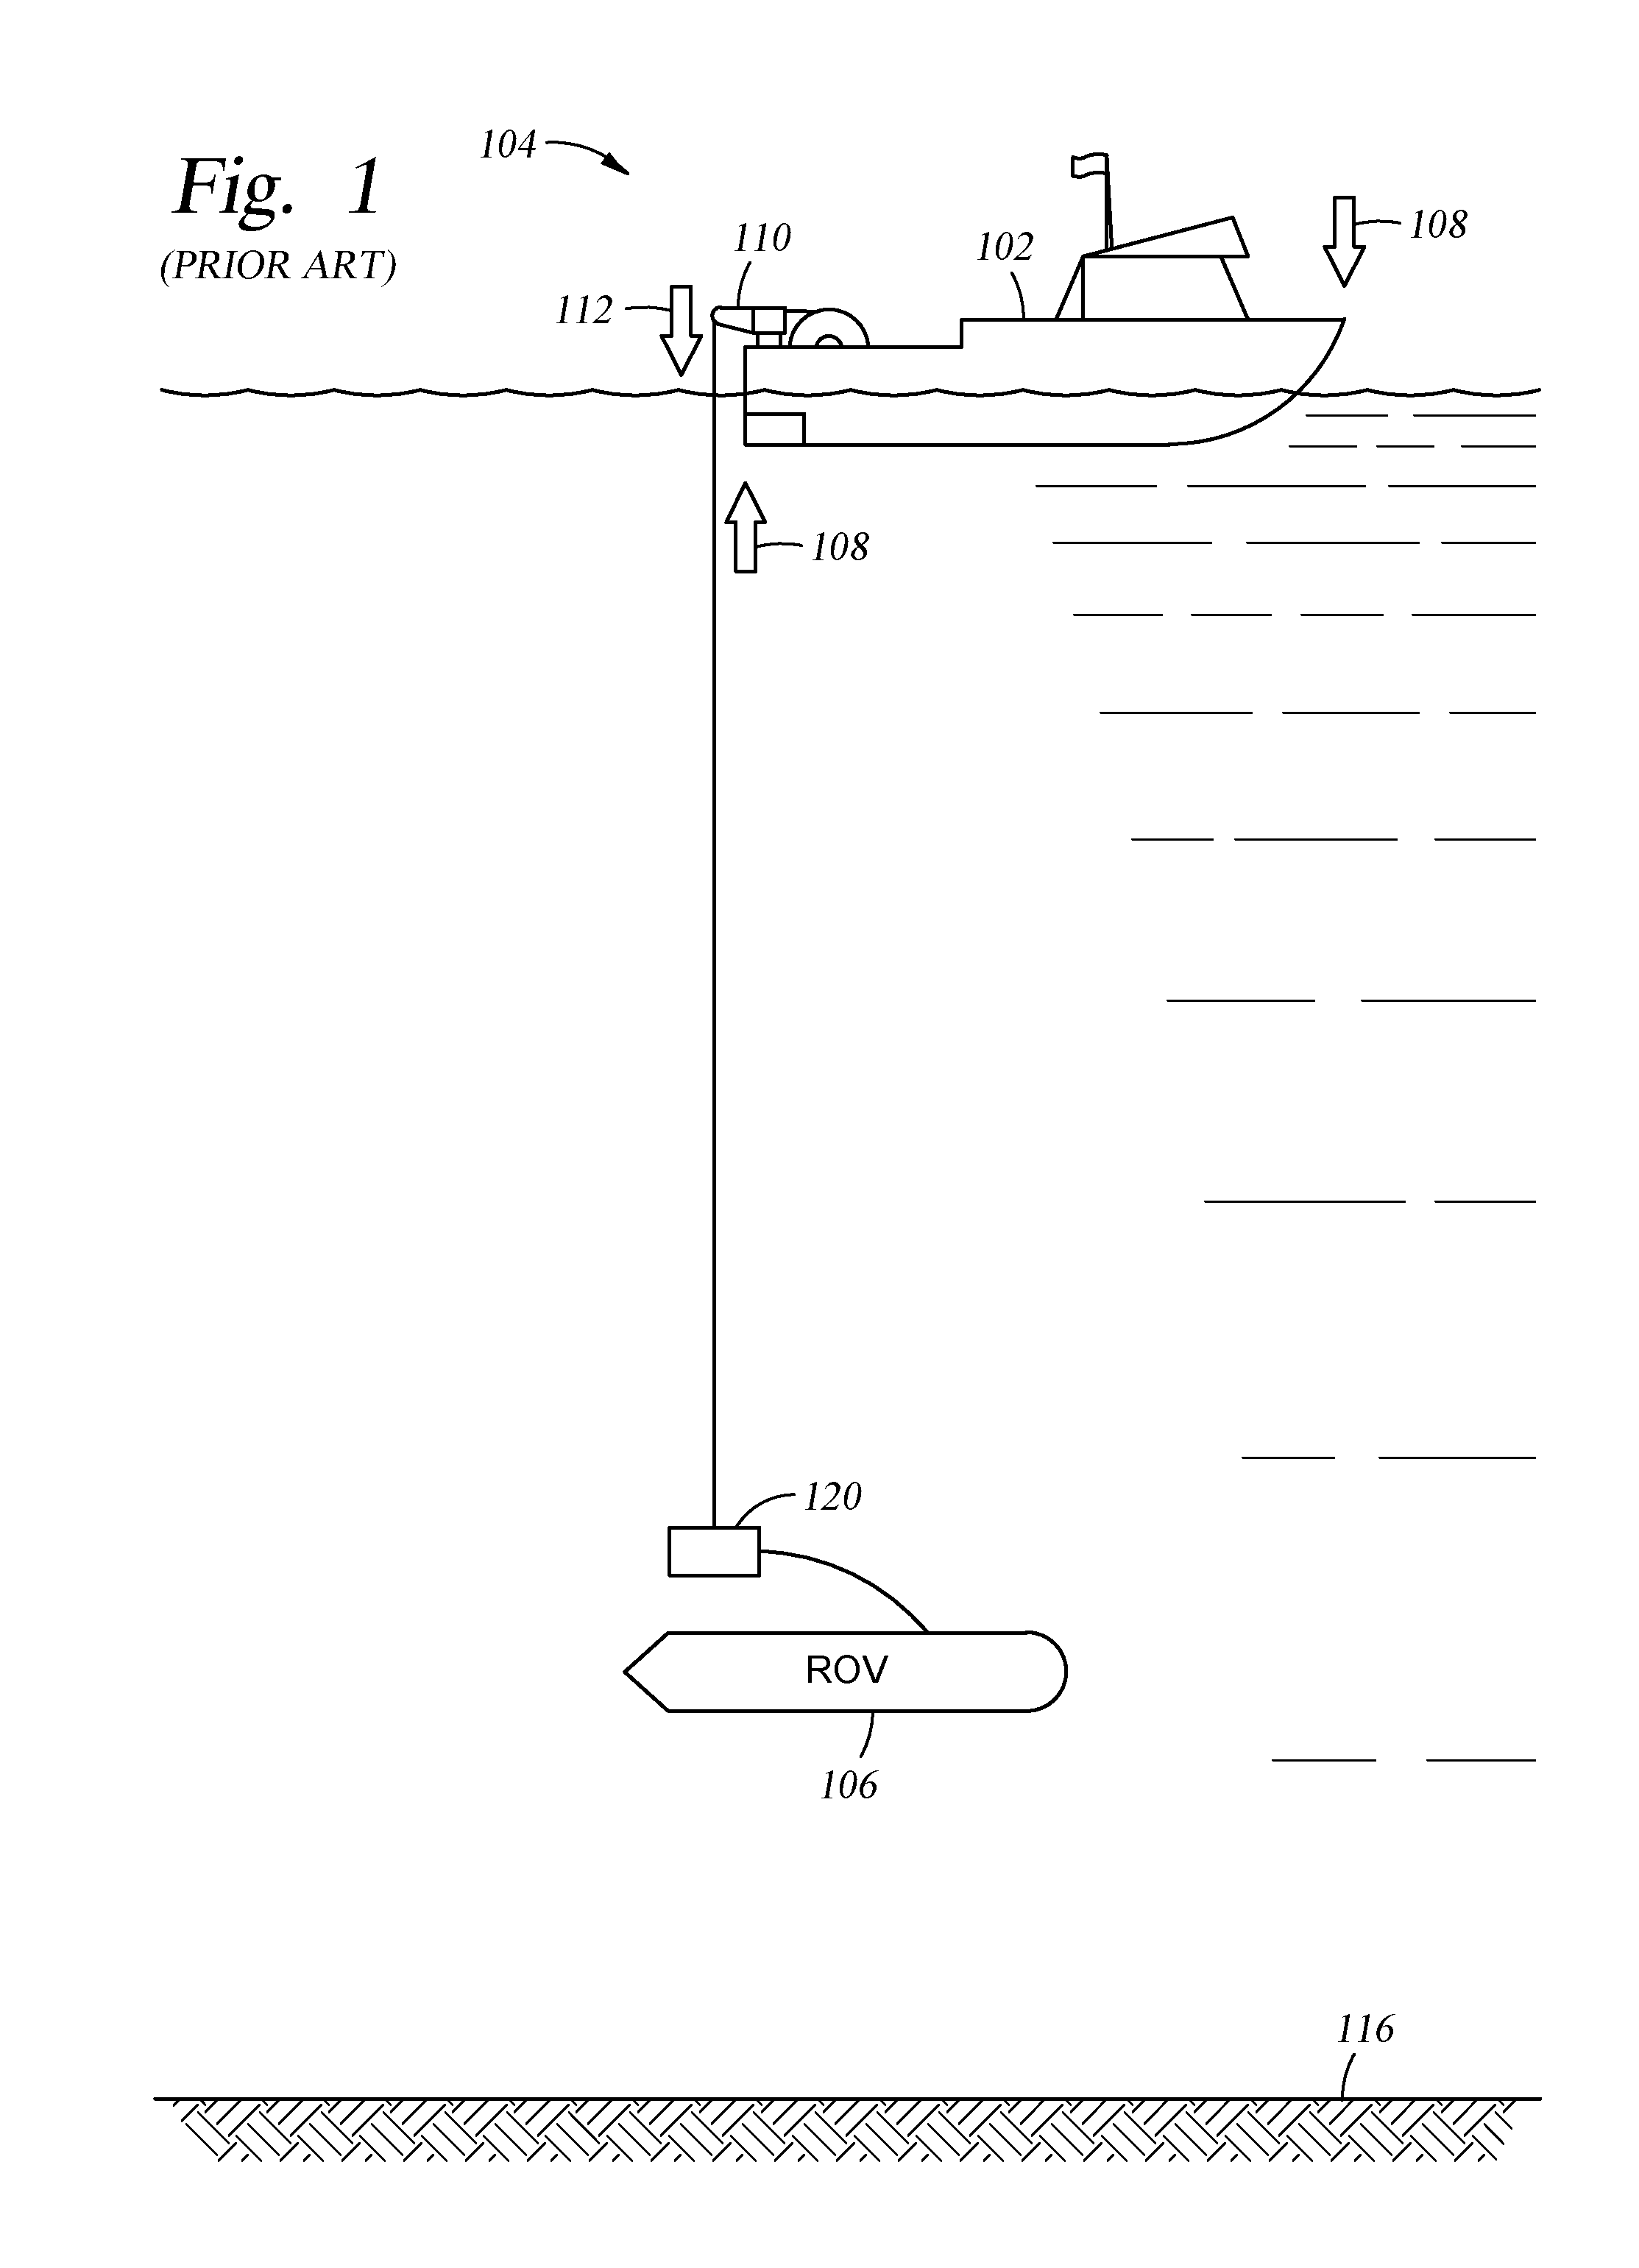 Motion compensation for relative motion between an object connected to a vessel and an object in the water